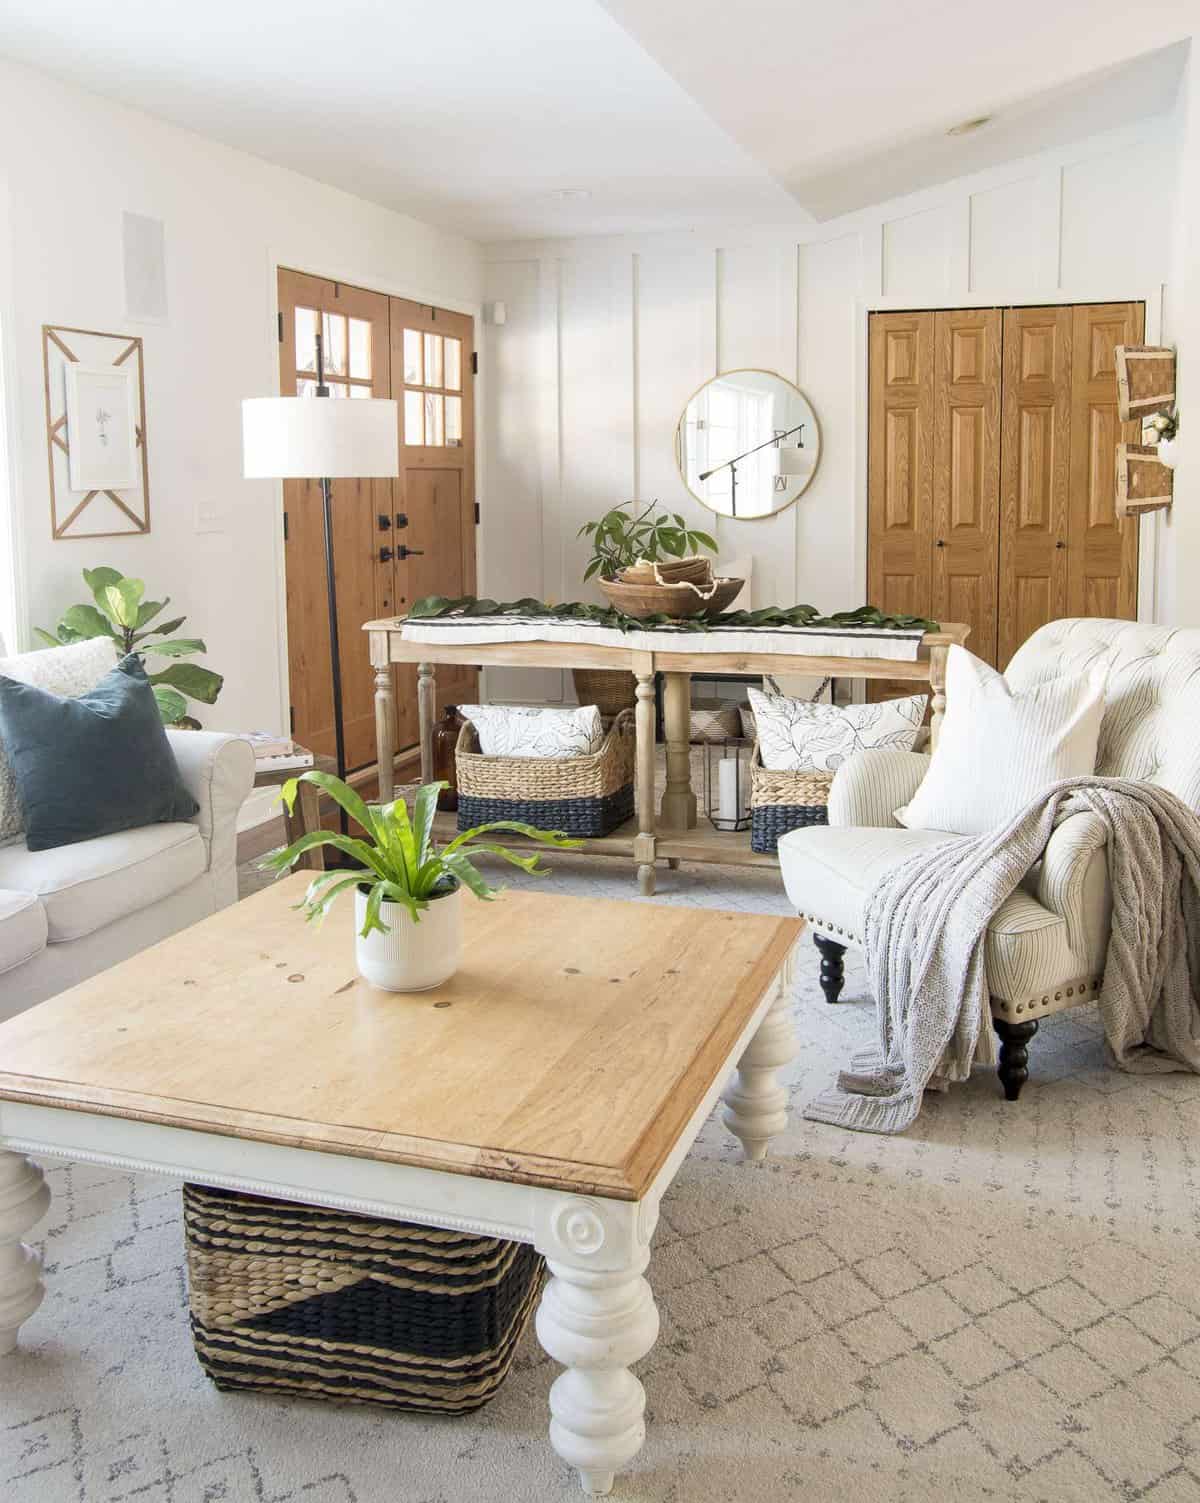 Do you need help creating a haven? Today I finish my 3 part series on how to create spaces you love by giving you decorating tips for design implementation. #fromhousetohaven #decoratingtips #homedecorating #modernfarmhouse